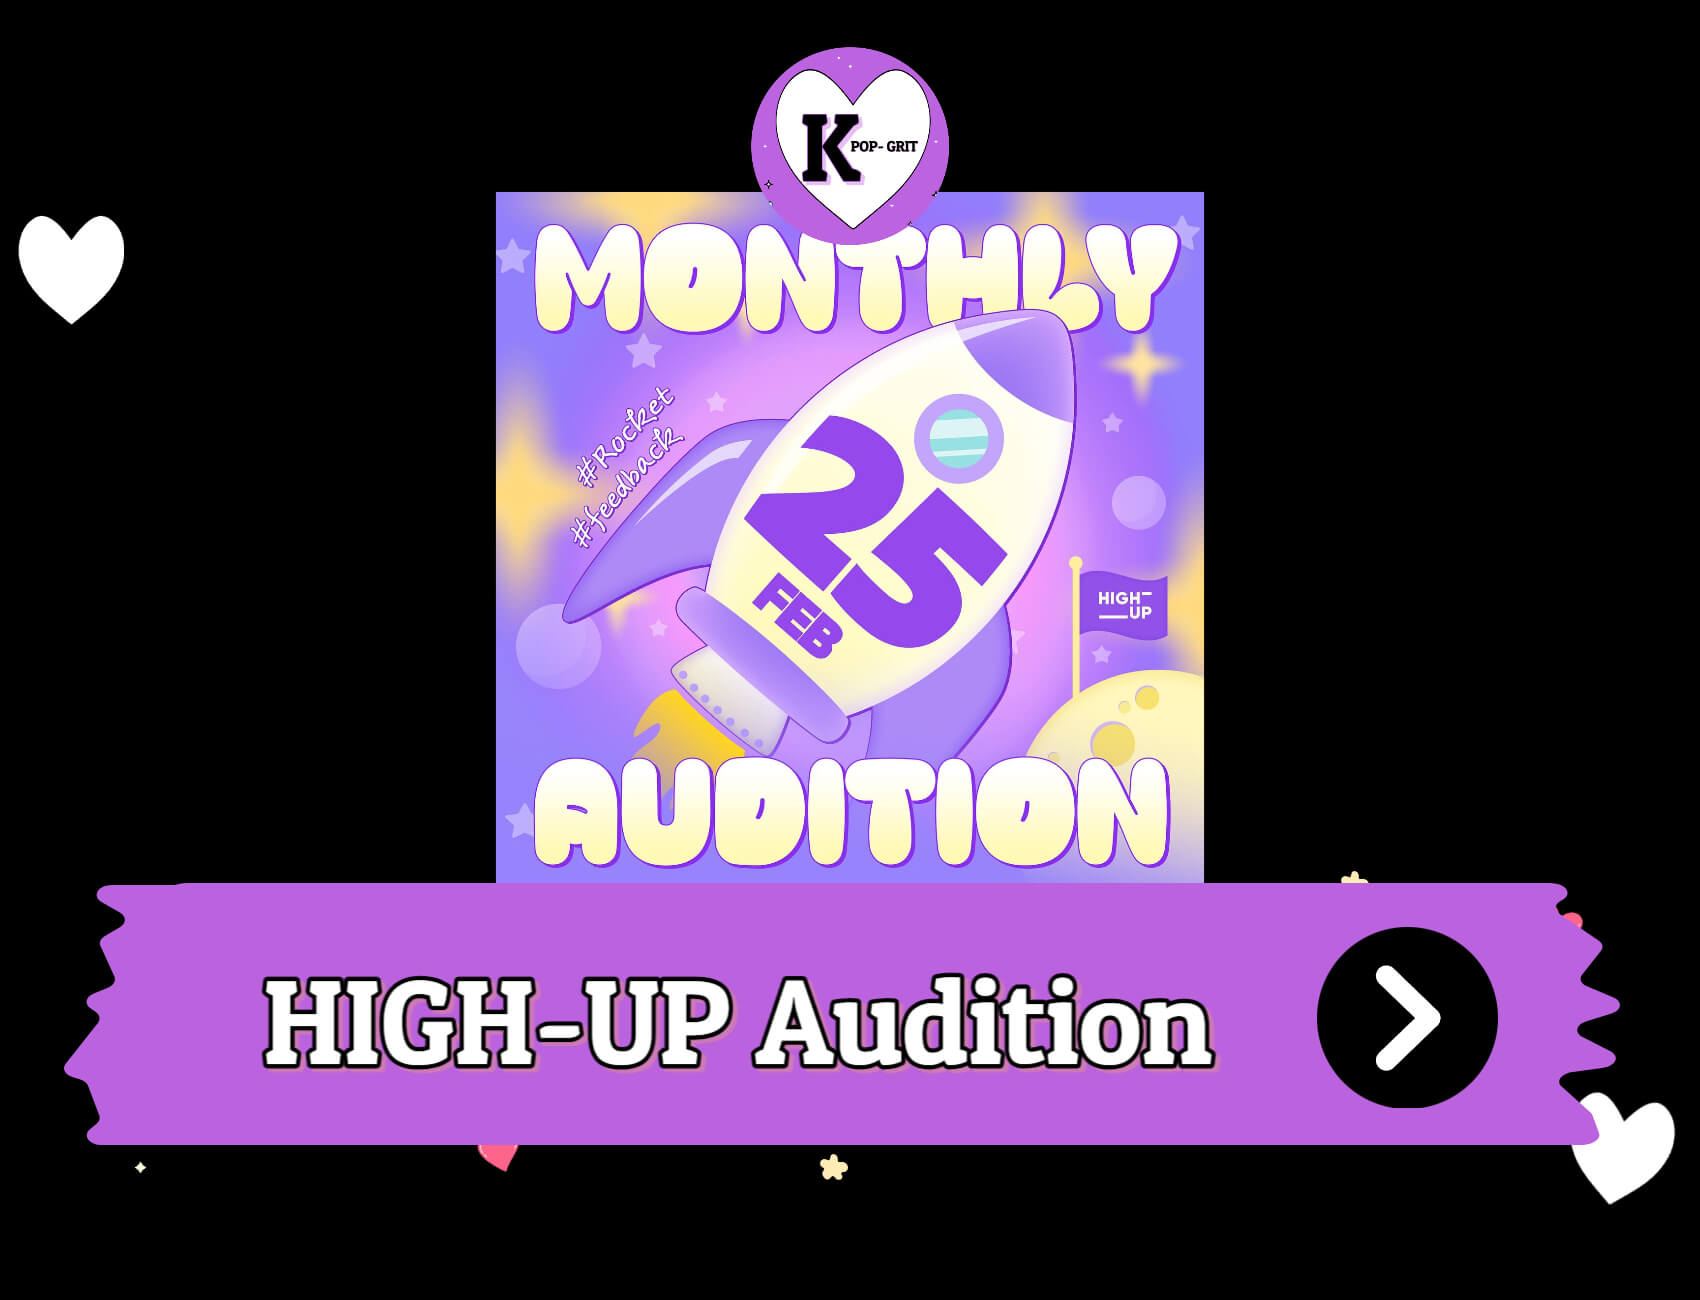 High-Up Audition